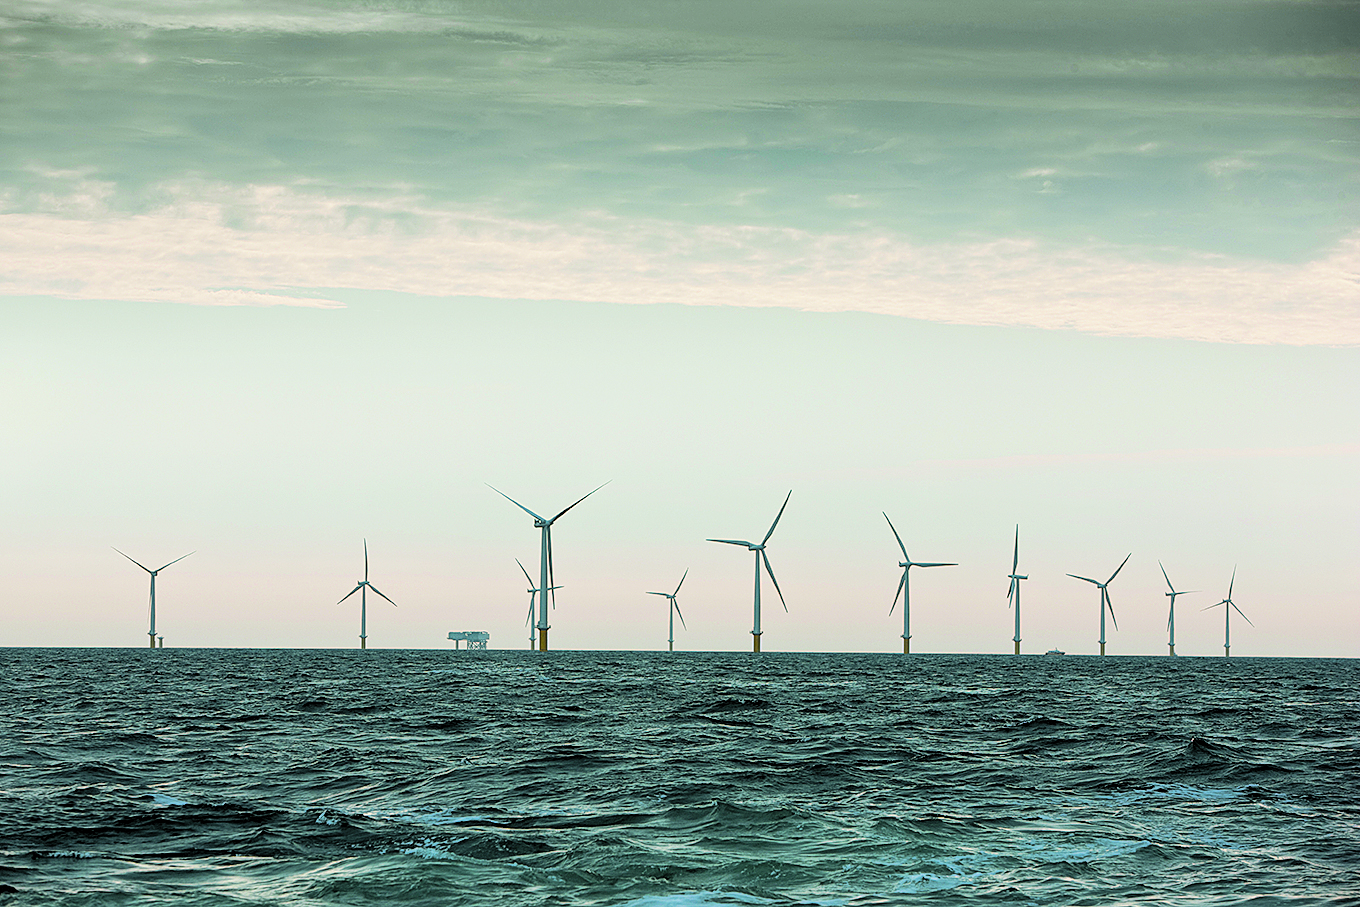 Part of an offshore wind farm developed by DONG Energy in the North Sea capable of powering 200,000 homes. Photo: ongenergy.com